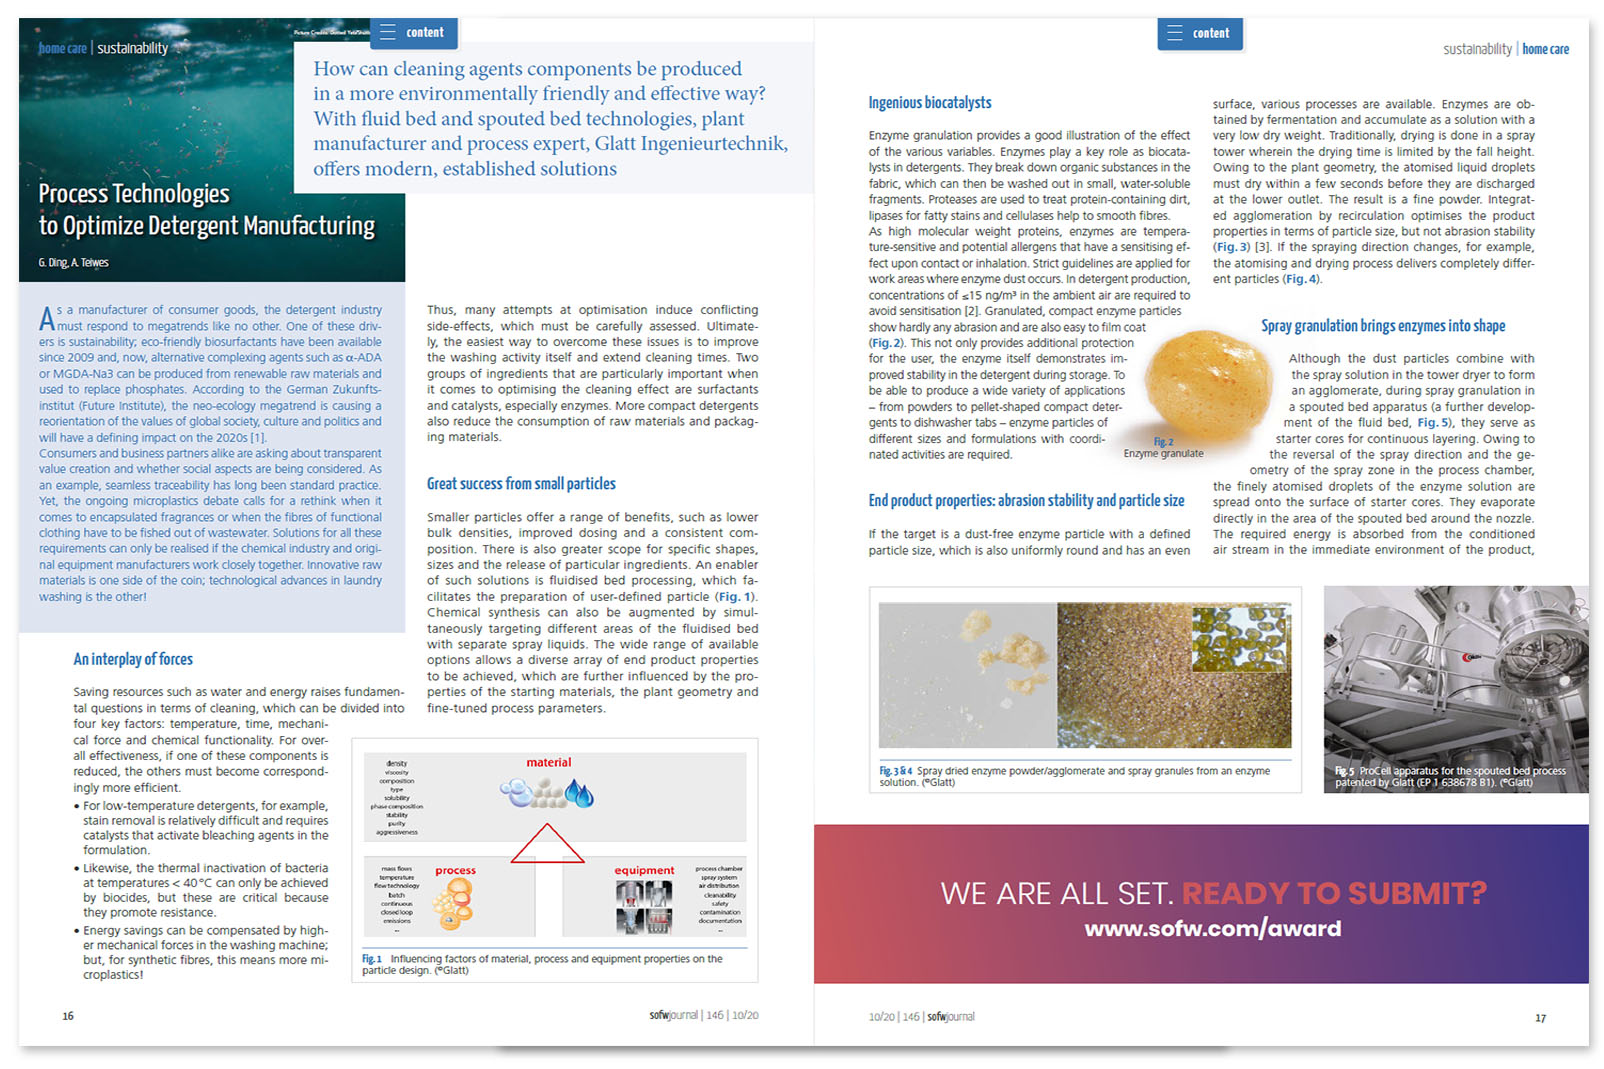 Glatt's technical article on 'Process technologies for optimizing detergent manufacturing', published in SOFW, issue 10.2020, Verlag für chemische Industrie H. Ziolkowsky GmbH.